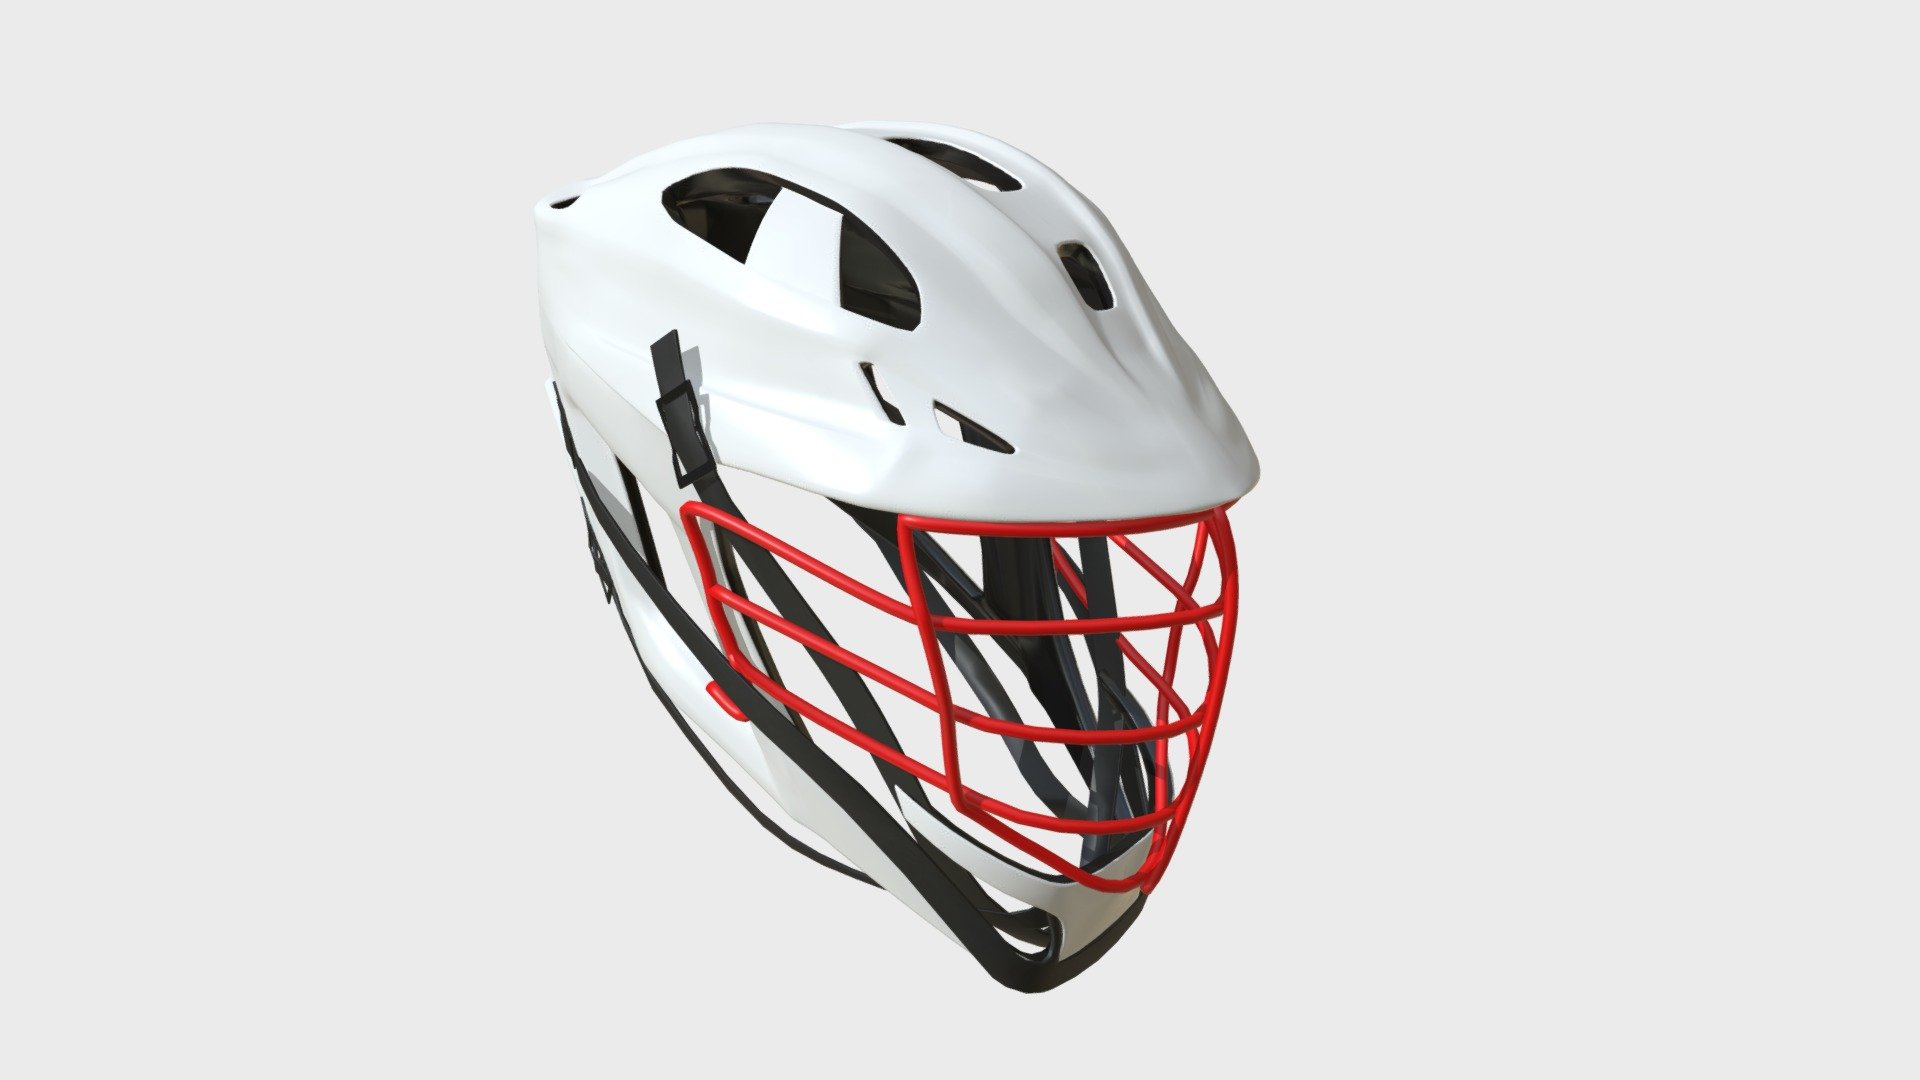 === The following description refers to the additional ZIP package provided with this model ===

Field sport helmet 3D Model. Production-ready 3D Model, with PBR materials, textures, non overlapping UV Layout map provided in the package.

Quads only geometries (no tris/ngons).

Formats included: FBX, OBJ; scenes: BLEND (with Cycles / Eevee PBR Materials and Textures); other: 16-bit PNGs with Alpha.

1 Object (mesh), 1 PBR Material, UV unwrapped (non overlapping UV Layout map provided in the package); UV-mapped Textures.

UV Layout maps and Image Textures resolutions: 2048x2048; PBR Textures made with Substance Painter.

Polygonal, QUADS ONLY (no tris/ngons); 37130 vertices, 37160 quad faces (74320 tris).

Real world dimensions; scene scale units: cm in Blender 3.6.1 LTS (that is: Metric with 0.01 scale).

Uniform scale object (scale applied in Blender 3.6.1 LTS) 3d model